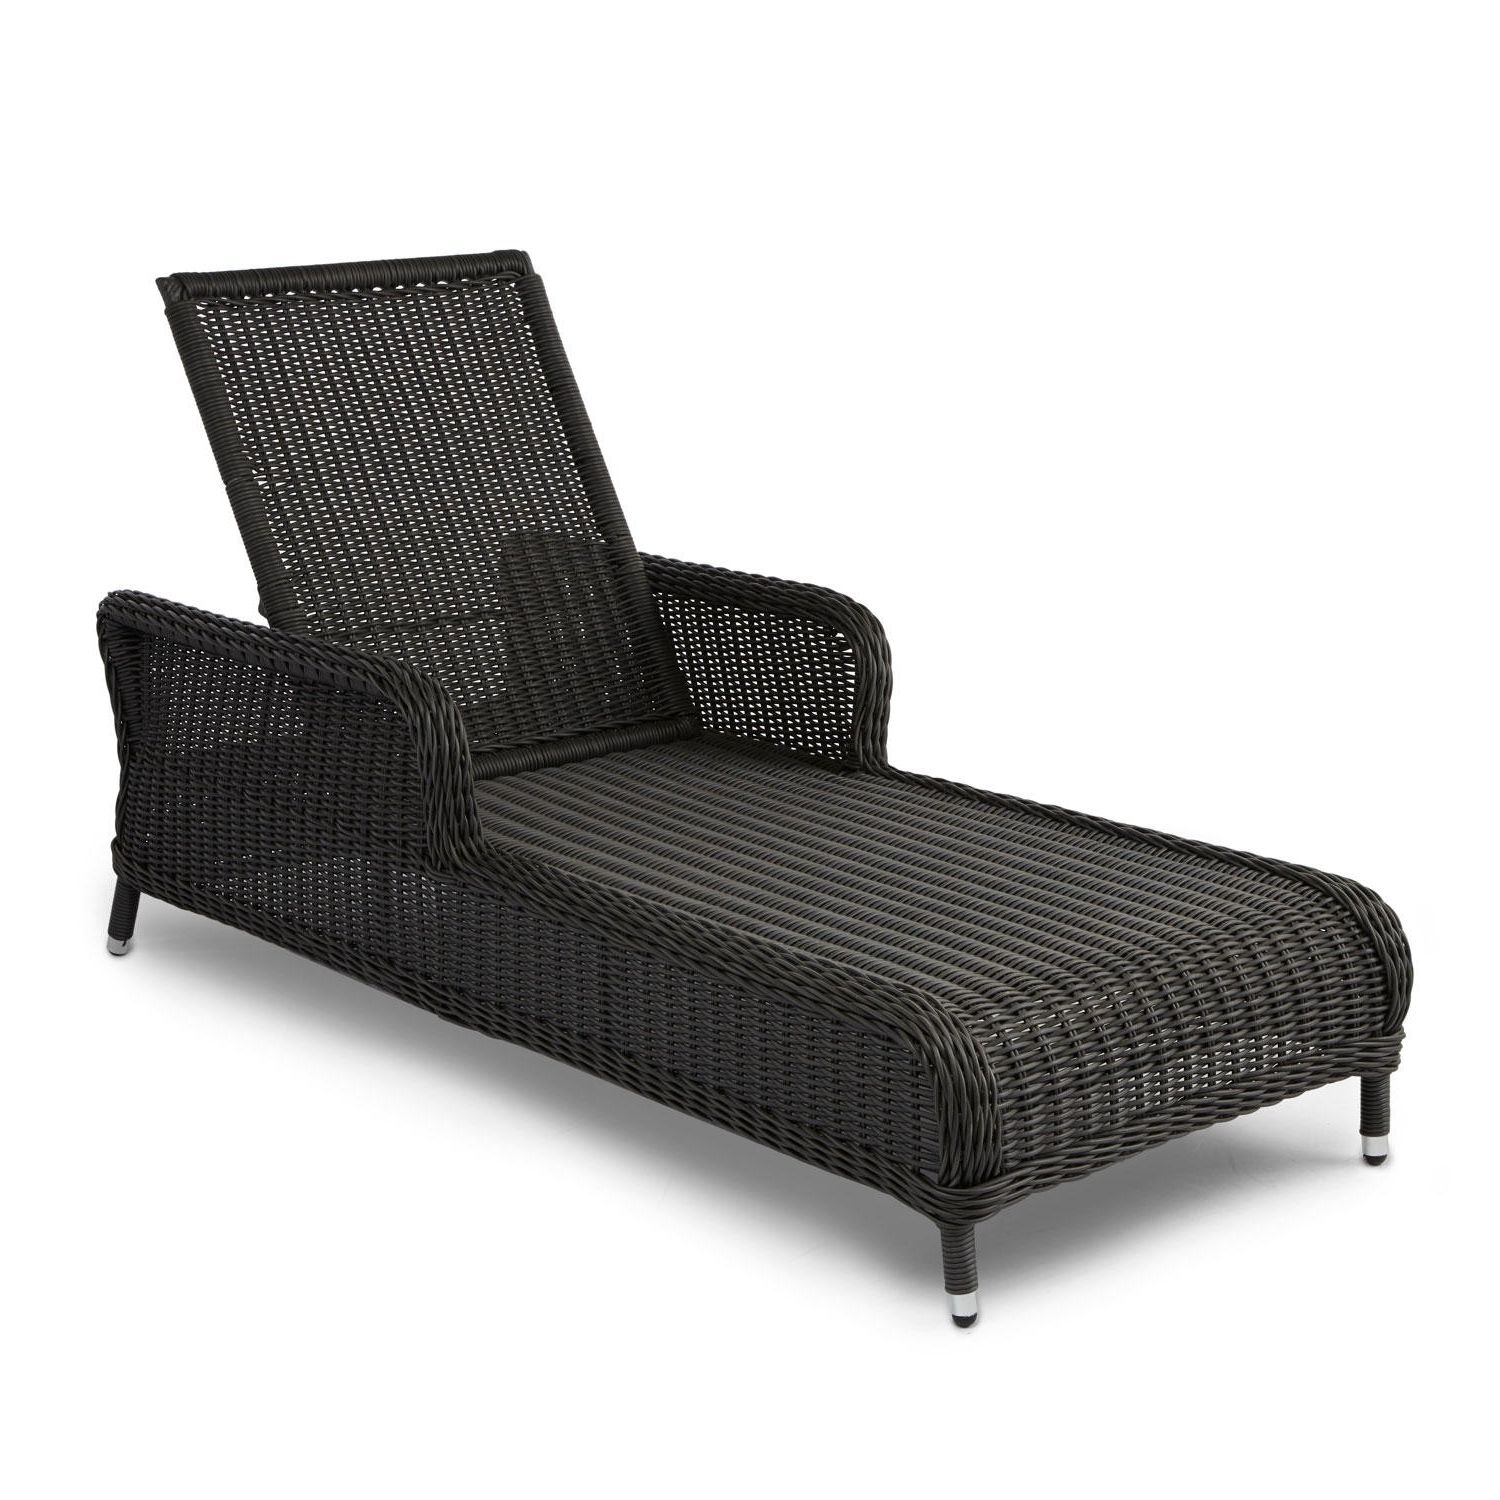 15 Best Ideas of Outdoor Wicker Chaise Lounges